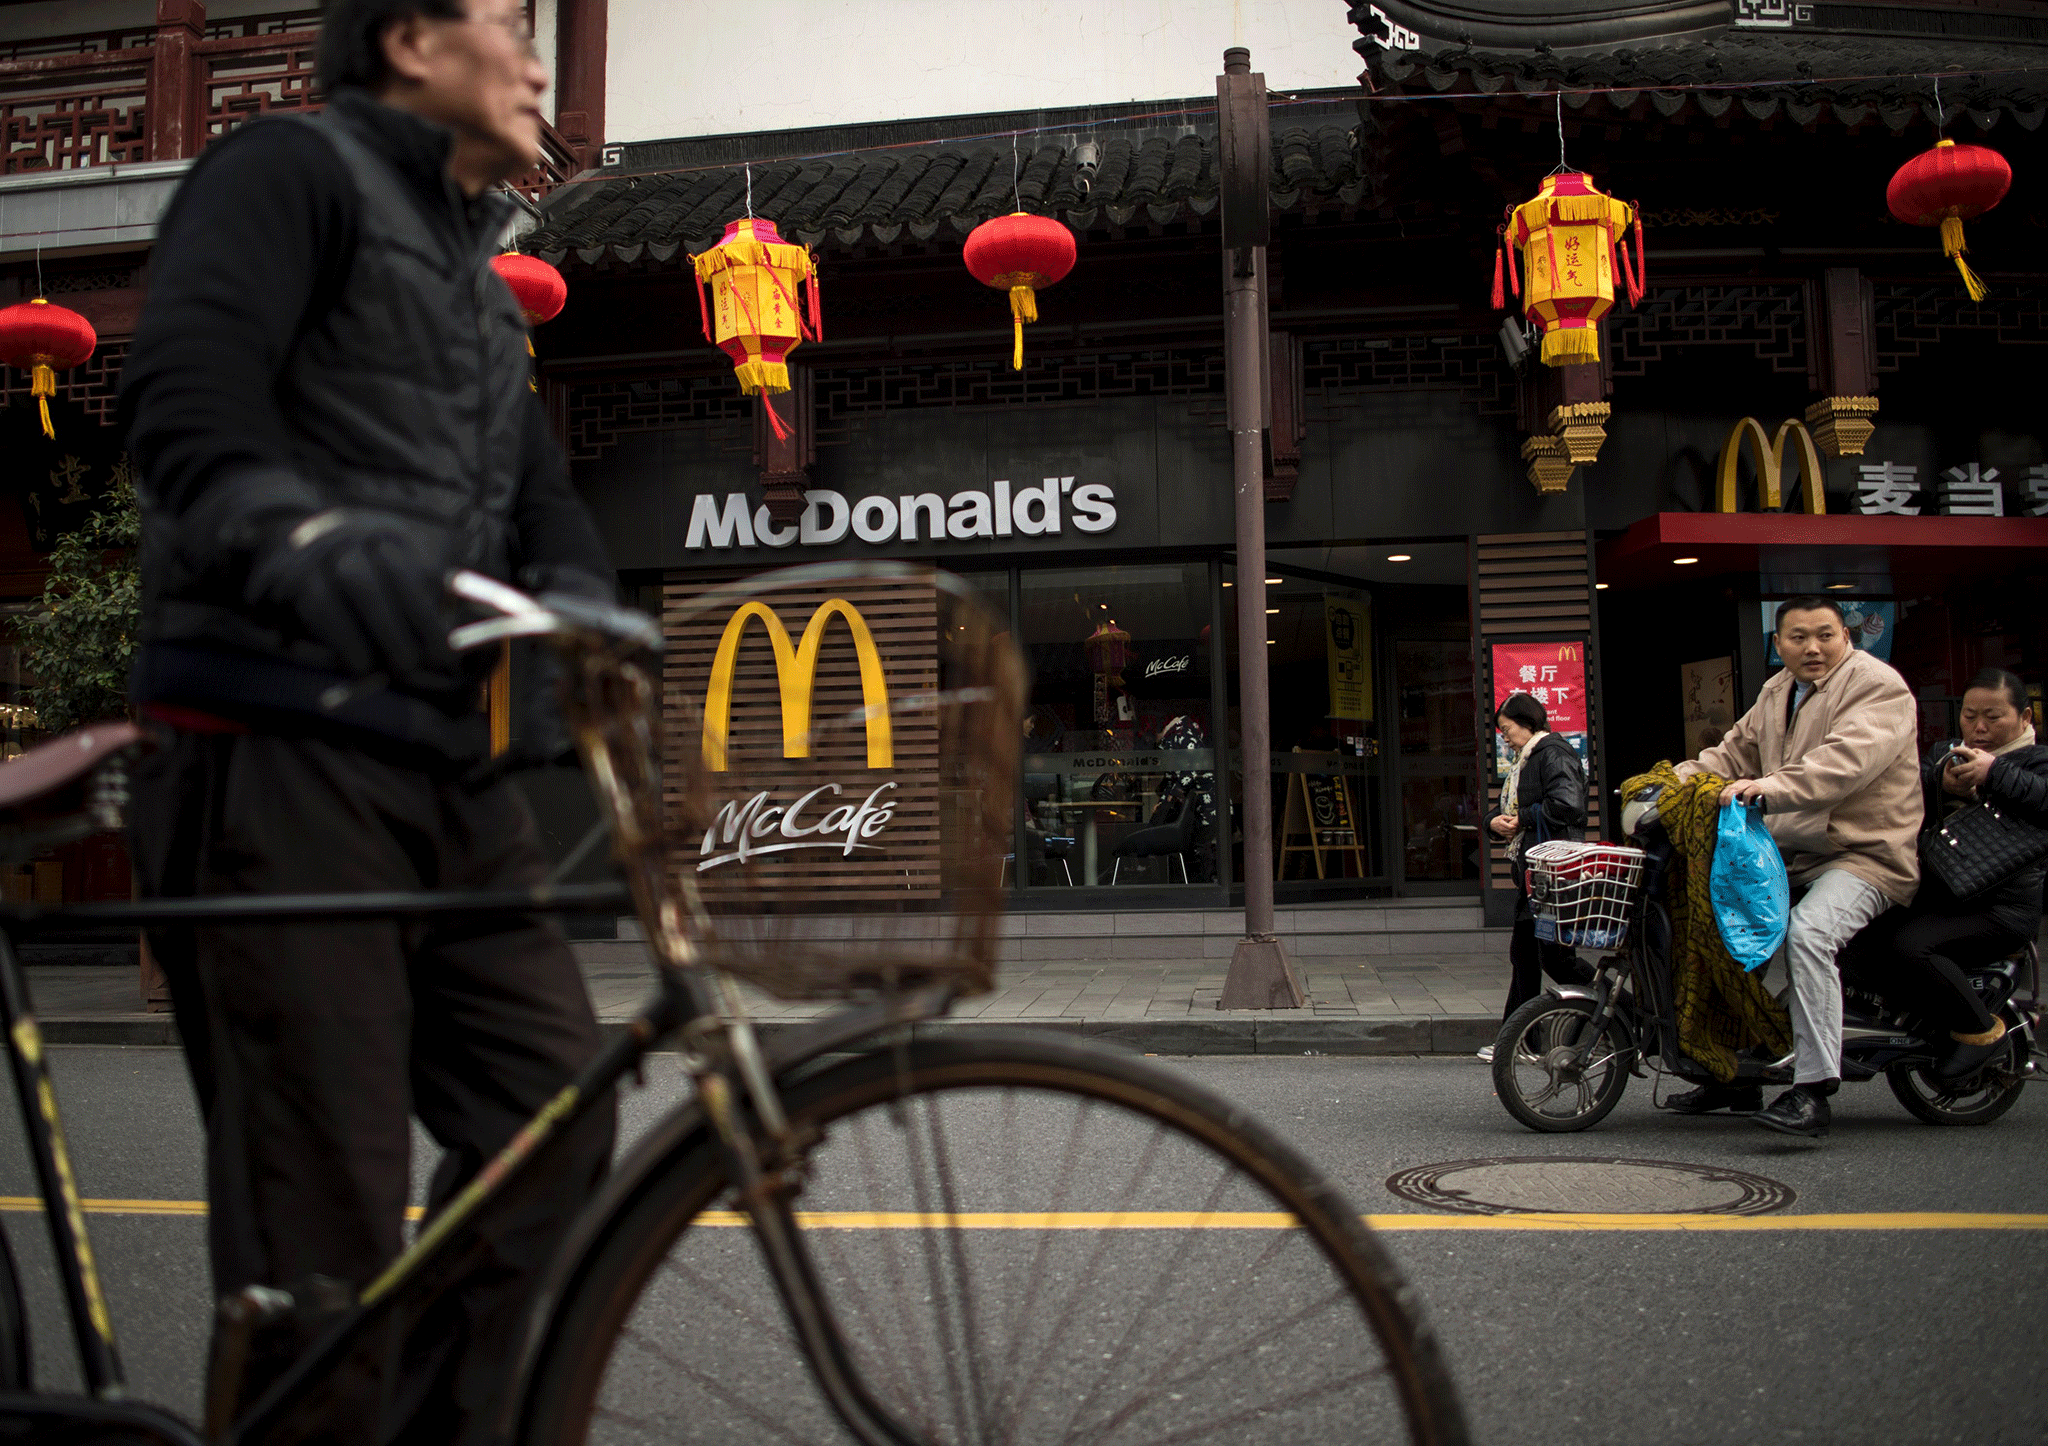 McDonald's mploys more than 120,000 people in China and has more than 2,400 restaurants on the mainland and 240 in Hong Kong